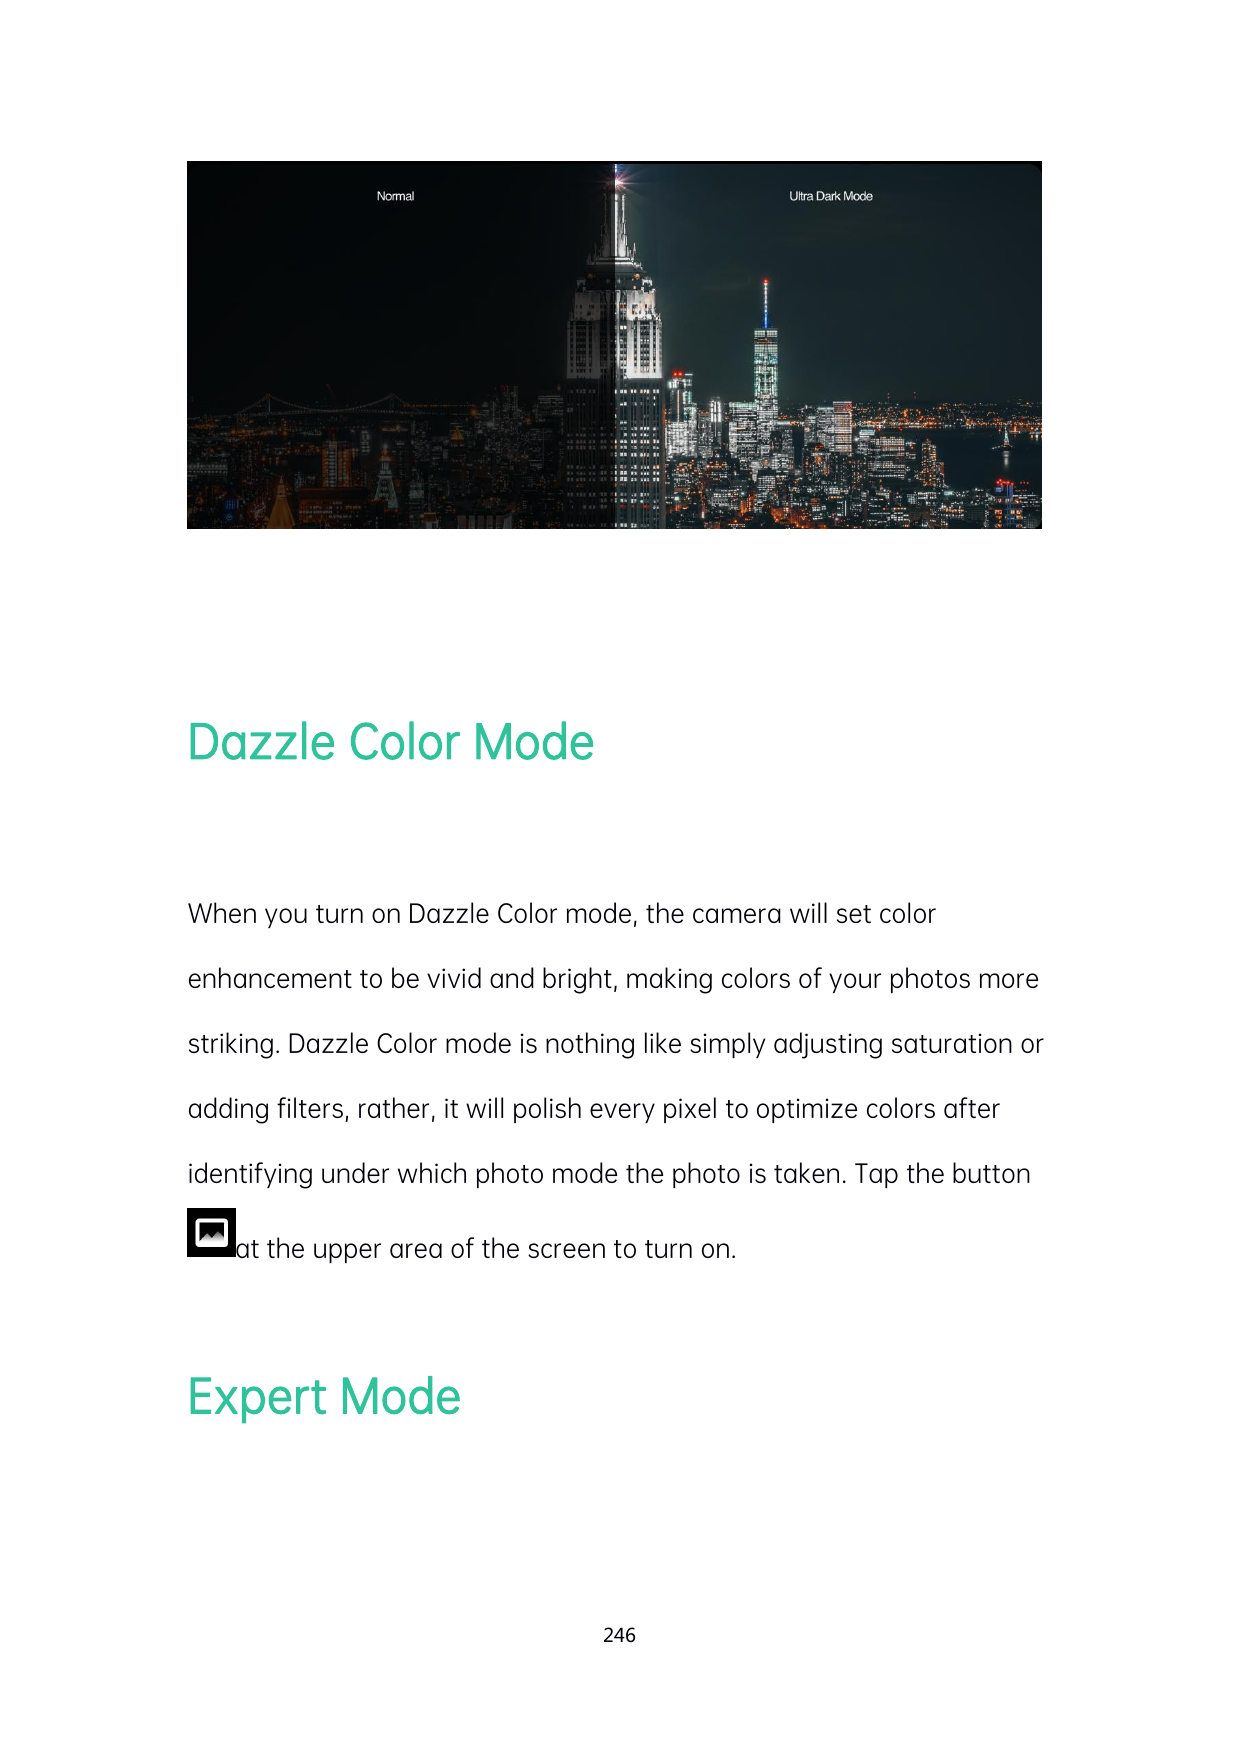 Dazzle Color ModeWhen you turn on Dazzle Color mode, the camera will set colorenhancement to be vivid and bright, making colors 